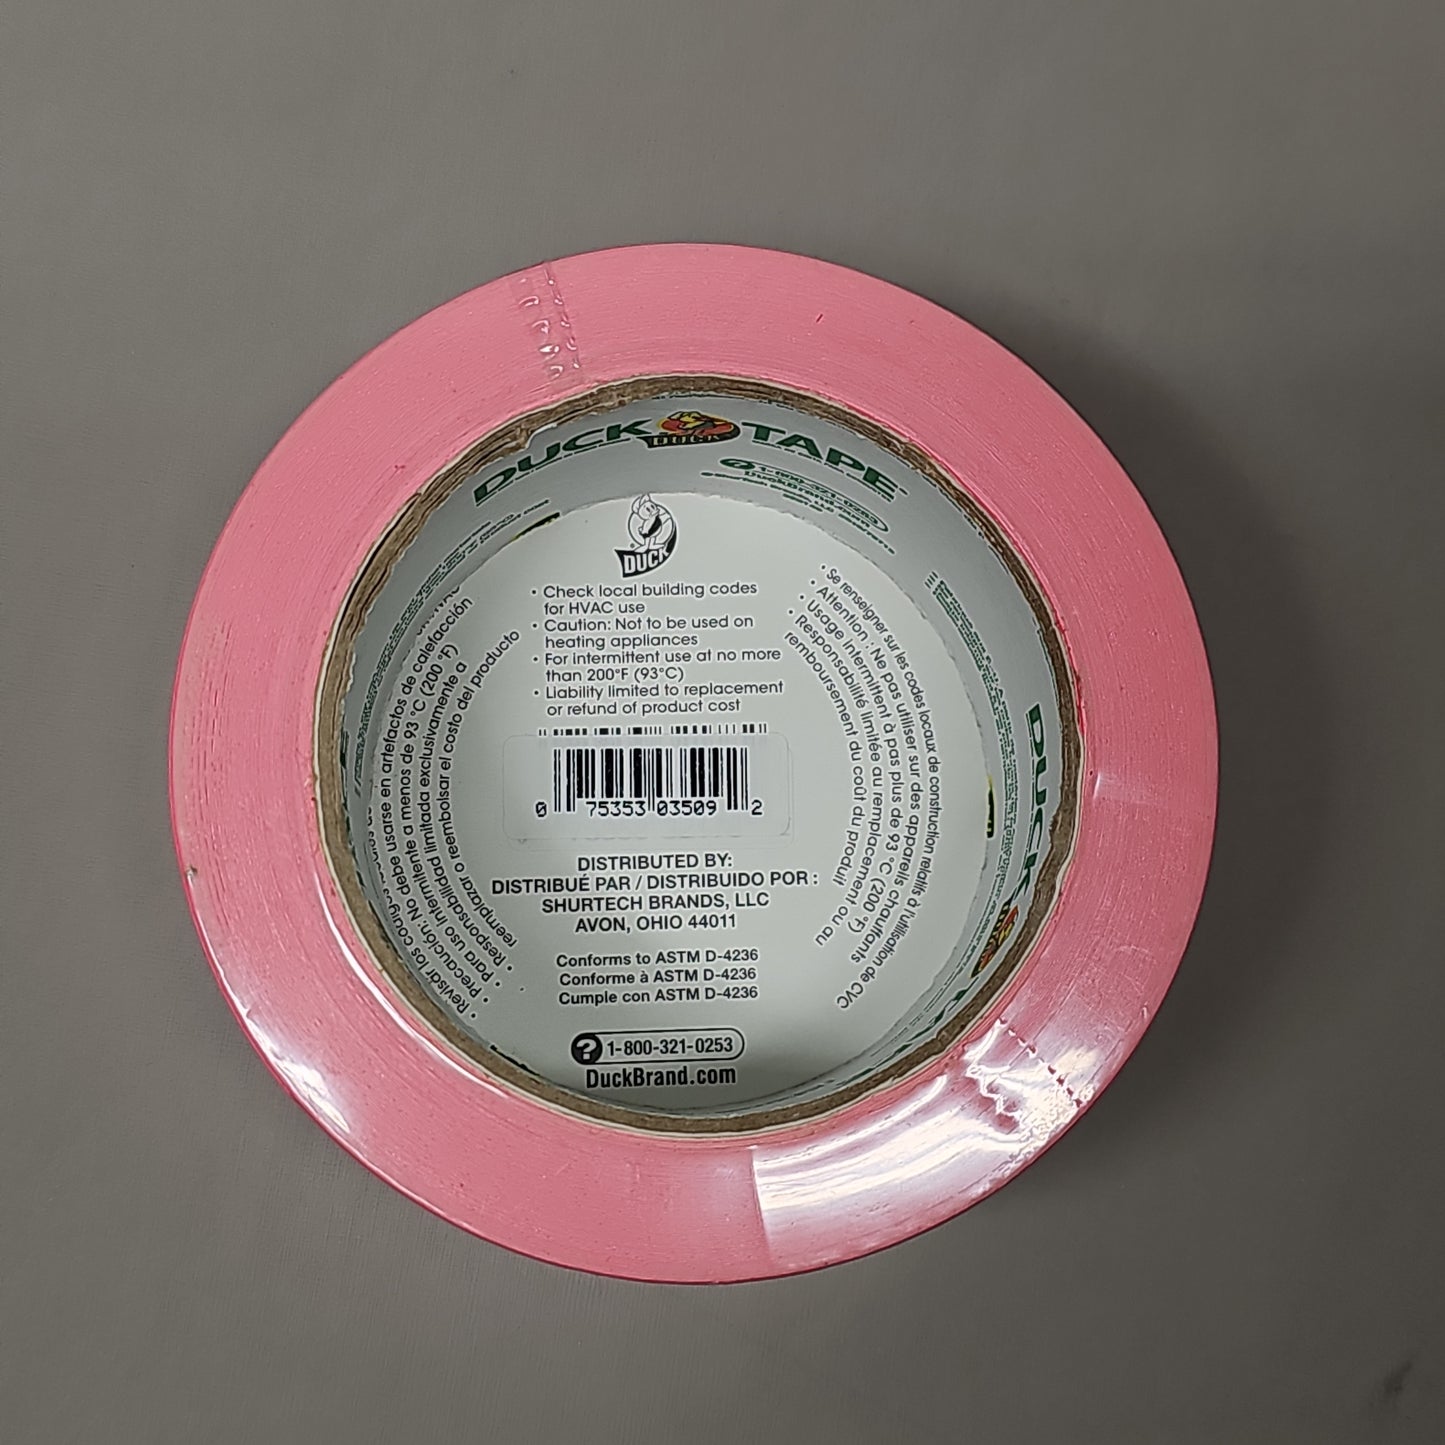 SHURTAPE DUCK TAPE 6 Rolls of Pink Duct Tape 1.88" X 20 YD 283876